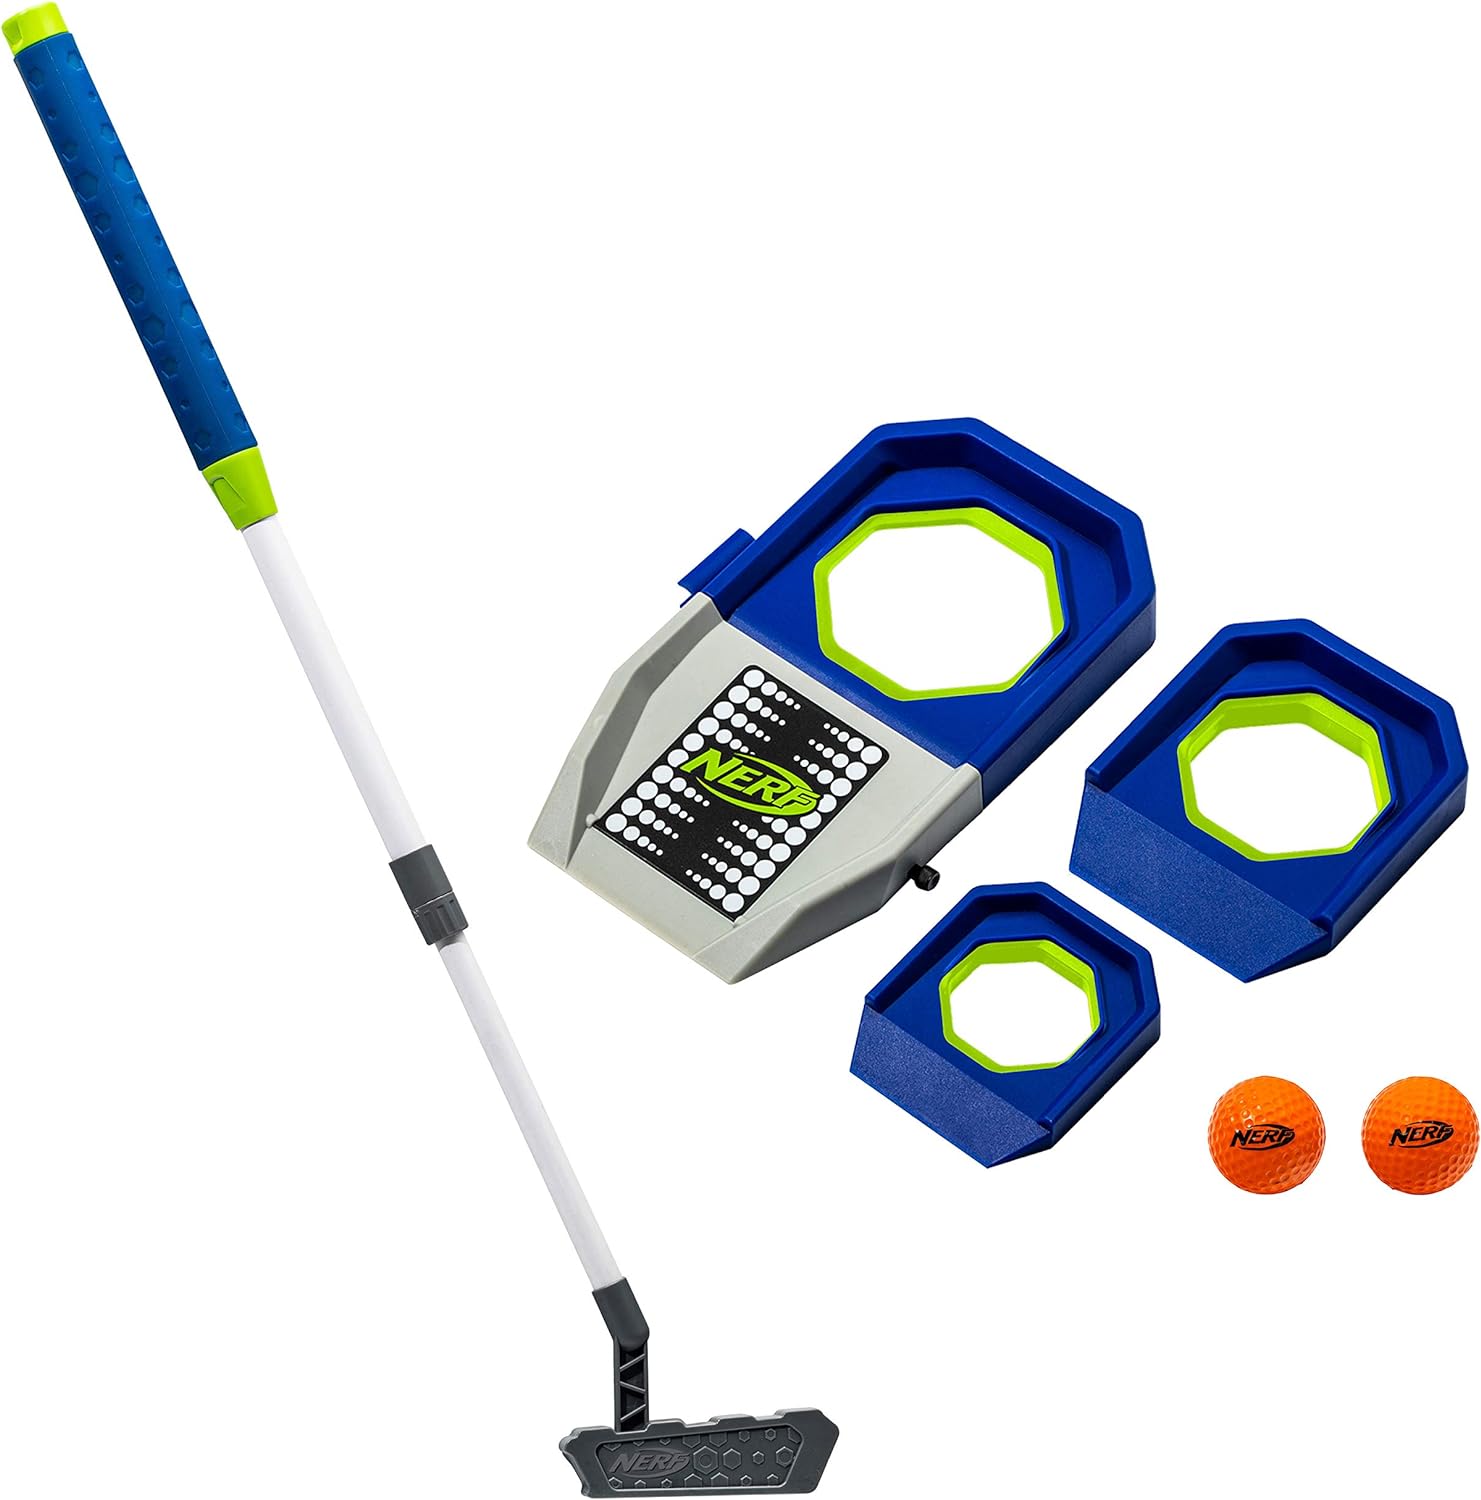 NERF Trick Shot Golf Set - Indoor & Outdoor Putting Trick Shot Kids Golf Set - Includes Putter, Balls, Ramp & Cups - All-in-One Golf Set for Kids